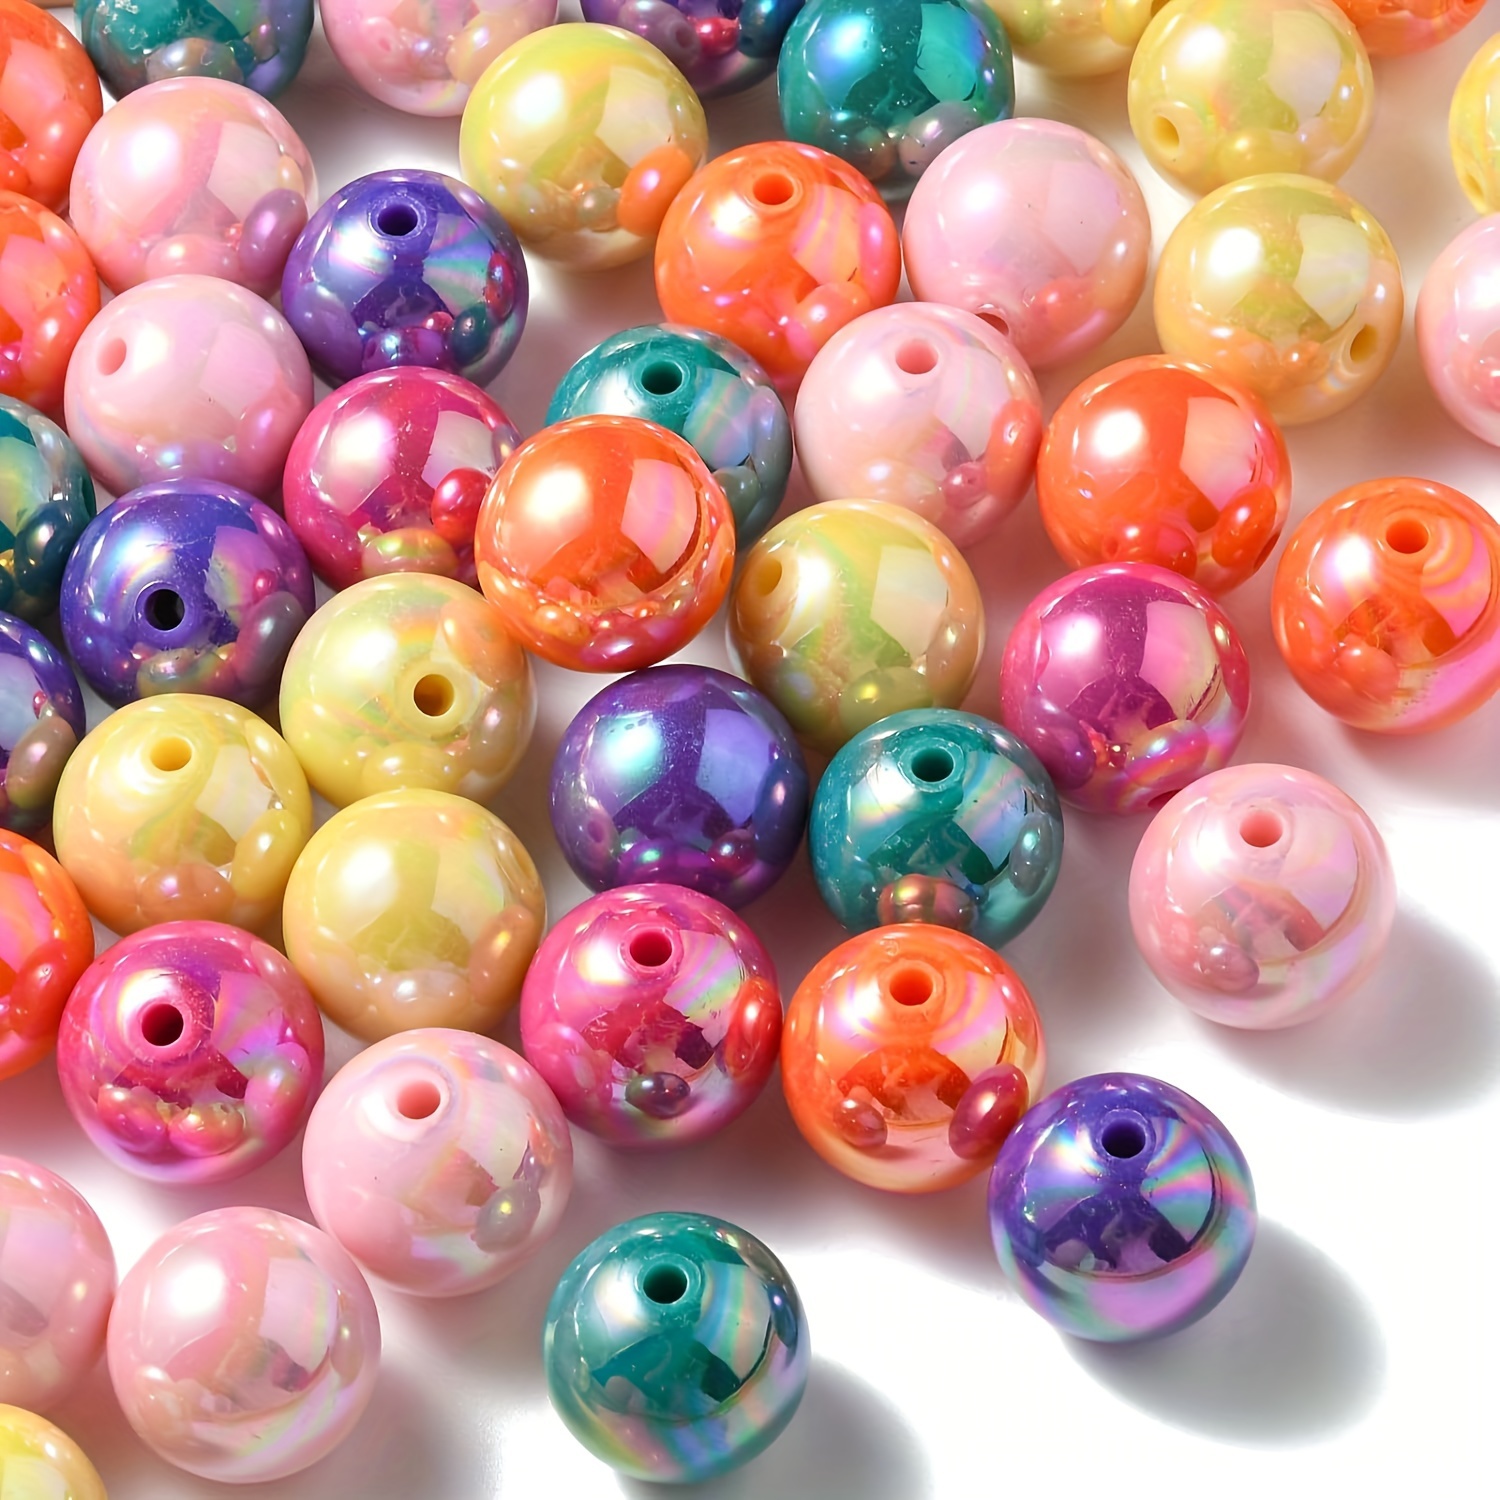 

About 110pcs 20mm Mixed Colorful Ab Plated Round Chunky Bubblegum Round Ball Acrylic Loose Beads For Jewelry Making Diy Fashion Necklace Bracelet Phone Bag Chain Beaded Craft Supplies